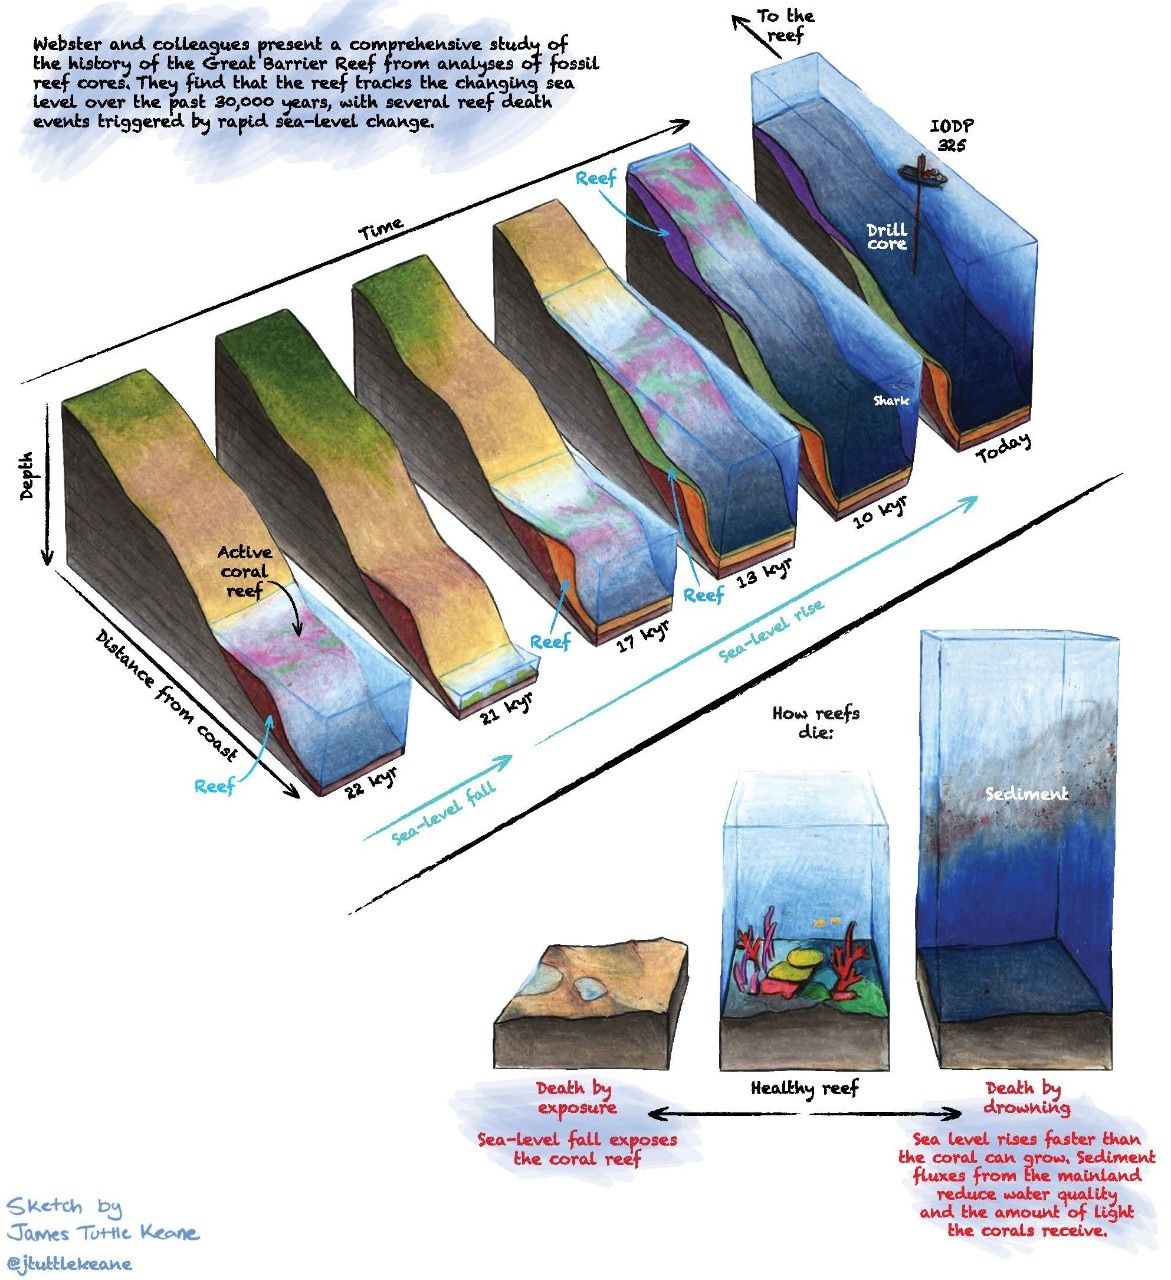 The reef has died five times in the past 30 millennia, largely in response to sea-level change caused by glaciation and deglaciation. A death event about 10,000 years ago looks more associated with high levels of sediment. Graphic by James Tuttle Keane and courtesy of Nature Geoscience.